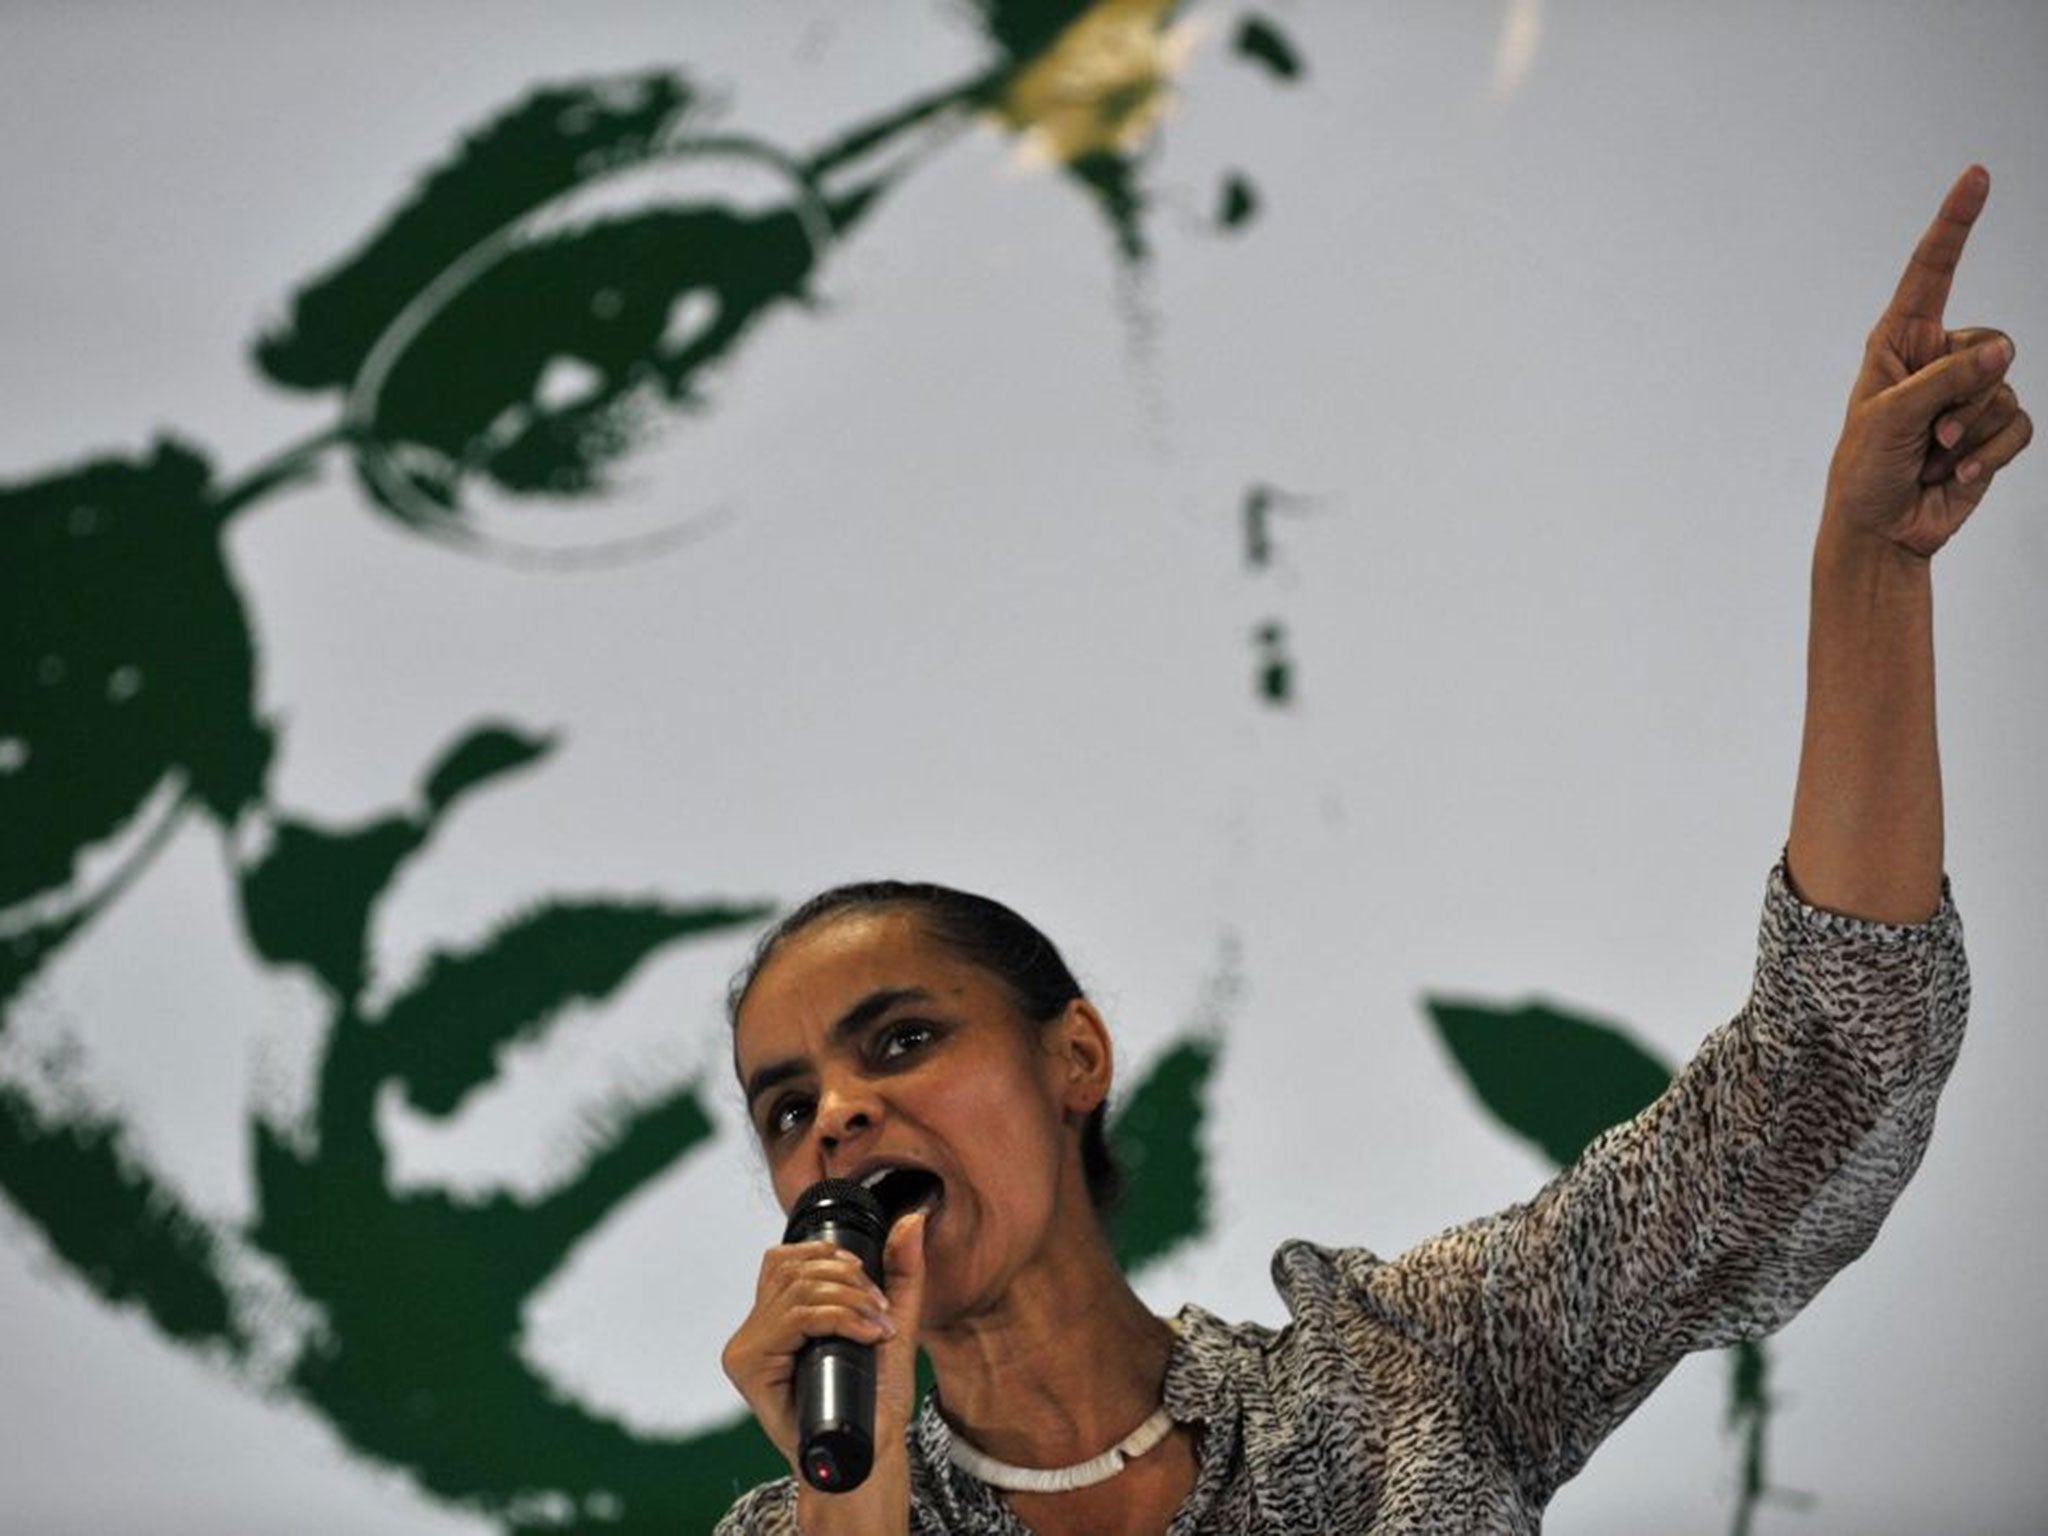 Marina Silva served as Environment Minister under the previous administration and is known for her religious and environmental beliefs. She is polling in second place for the October election